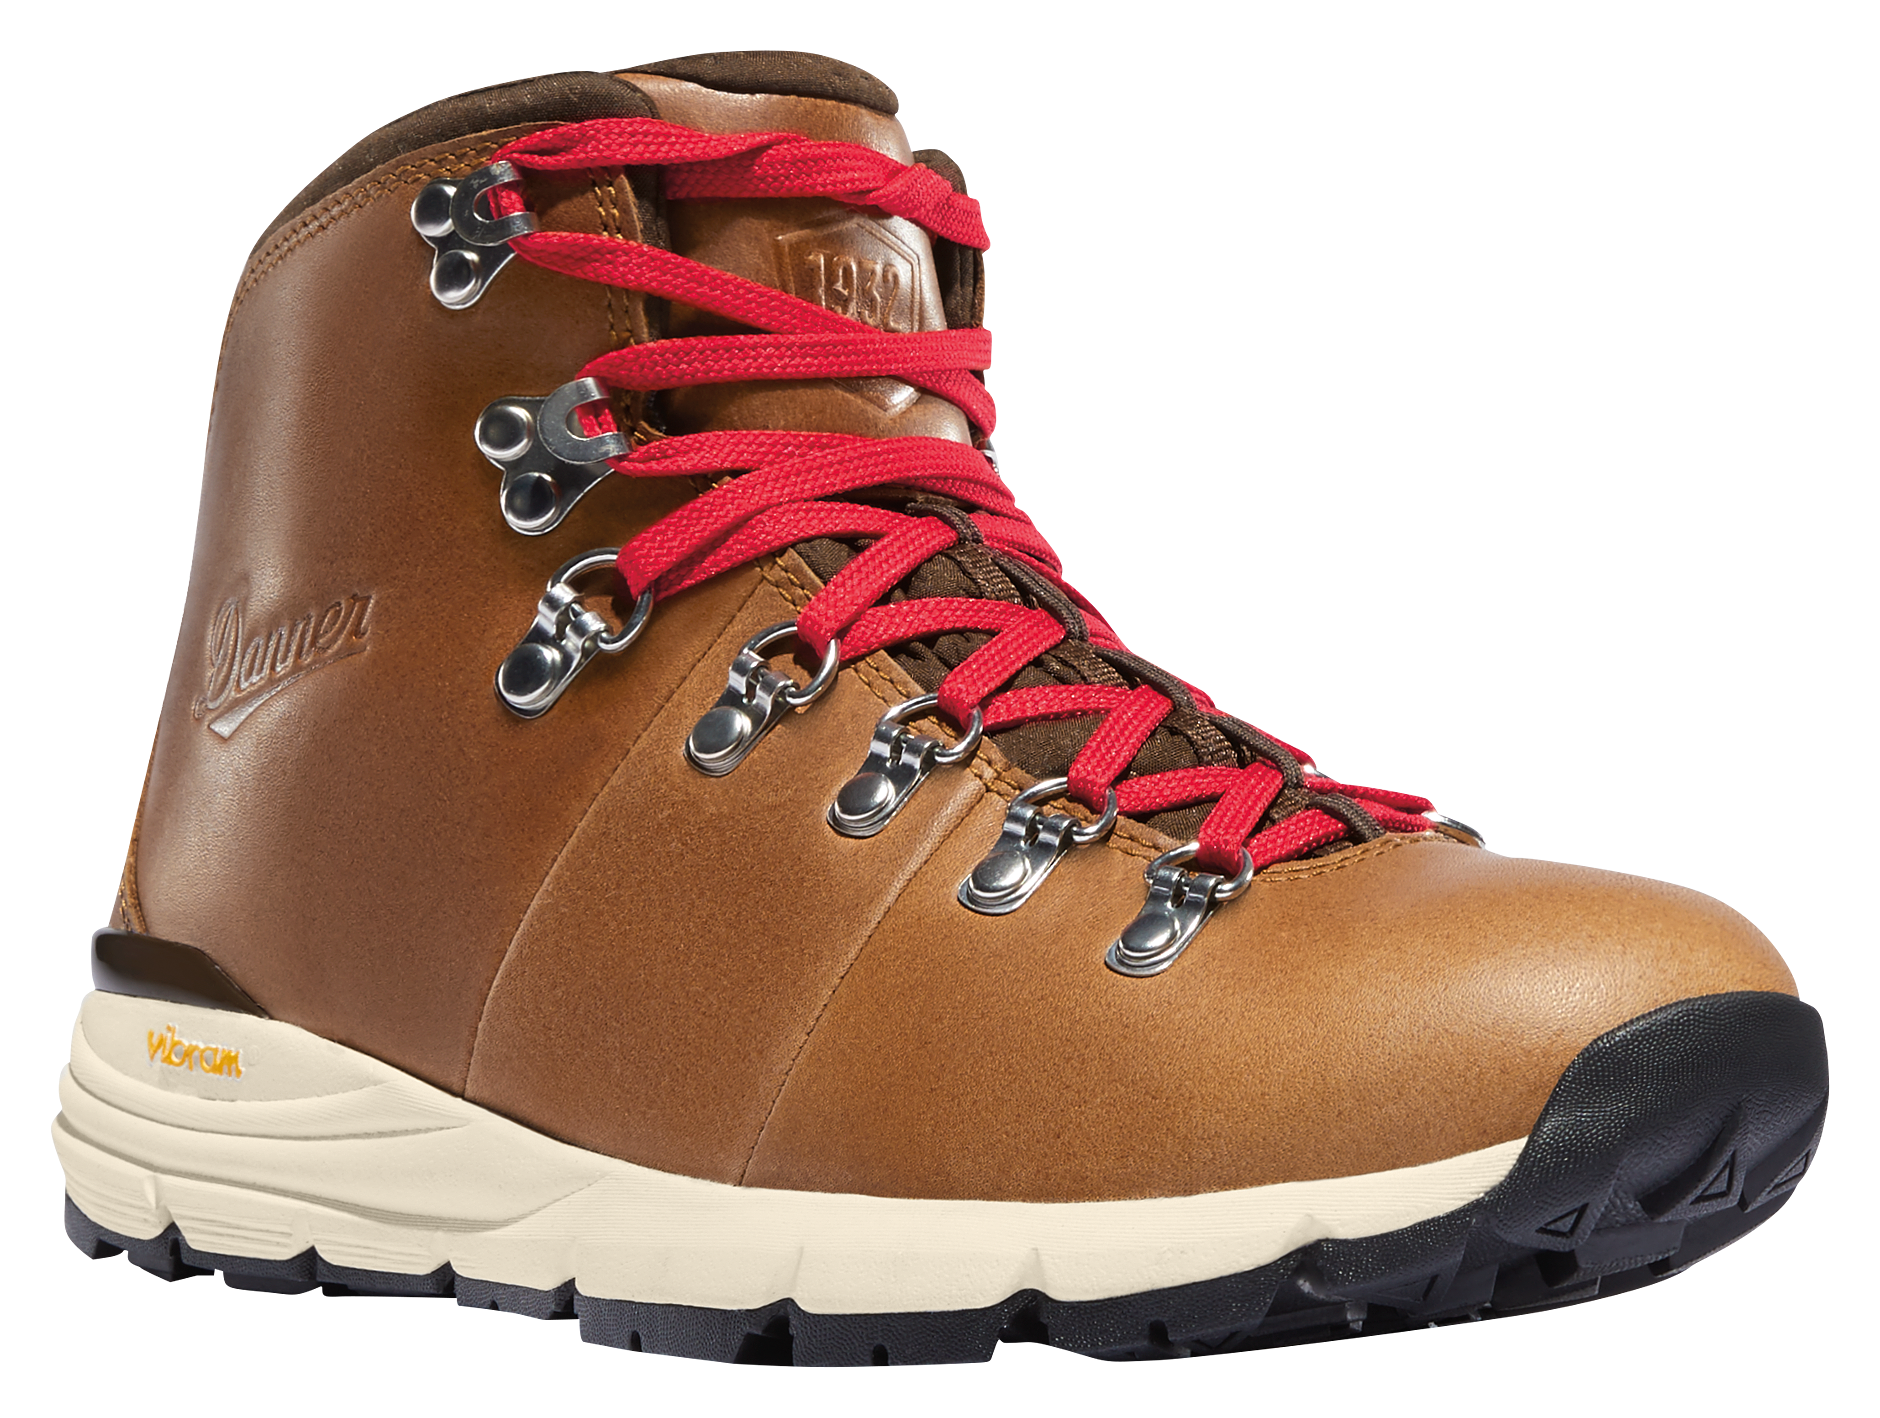 Danner Mountain 600 Leather Waterproof Hiking Boots for Ladies - Saddle Tan - 10M